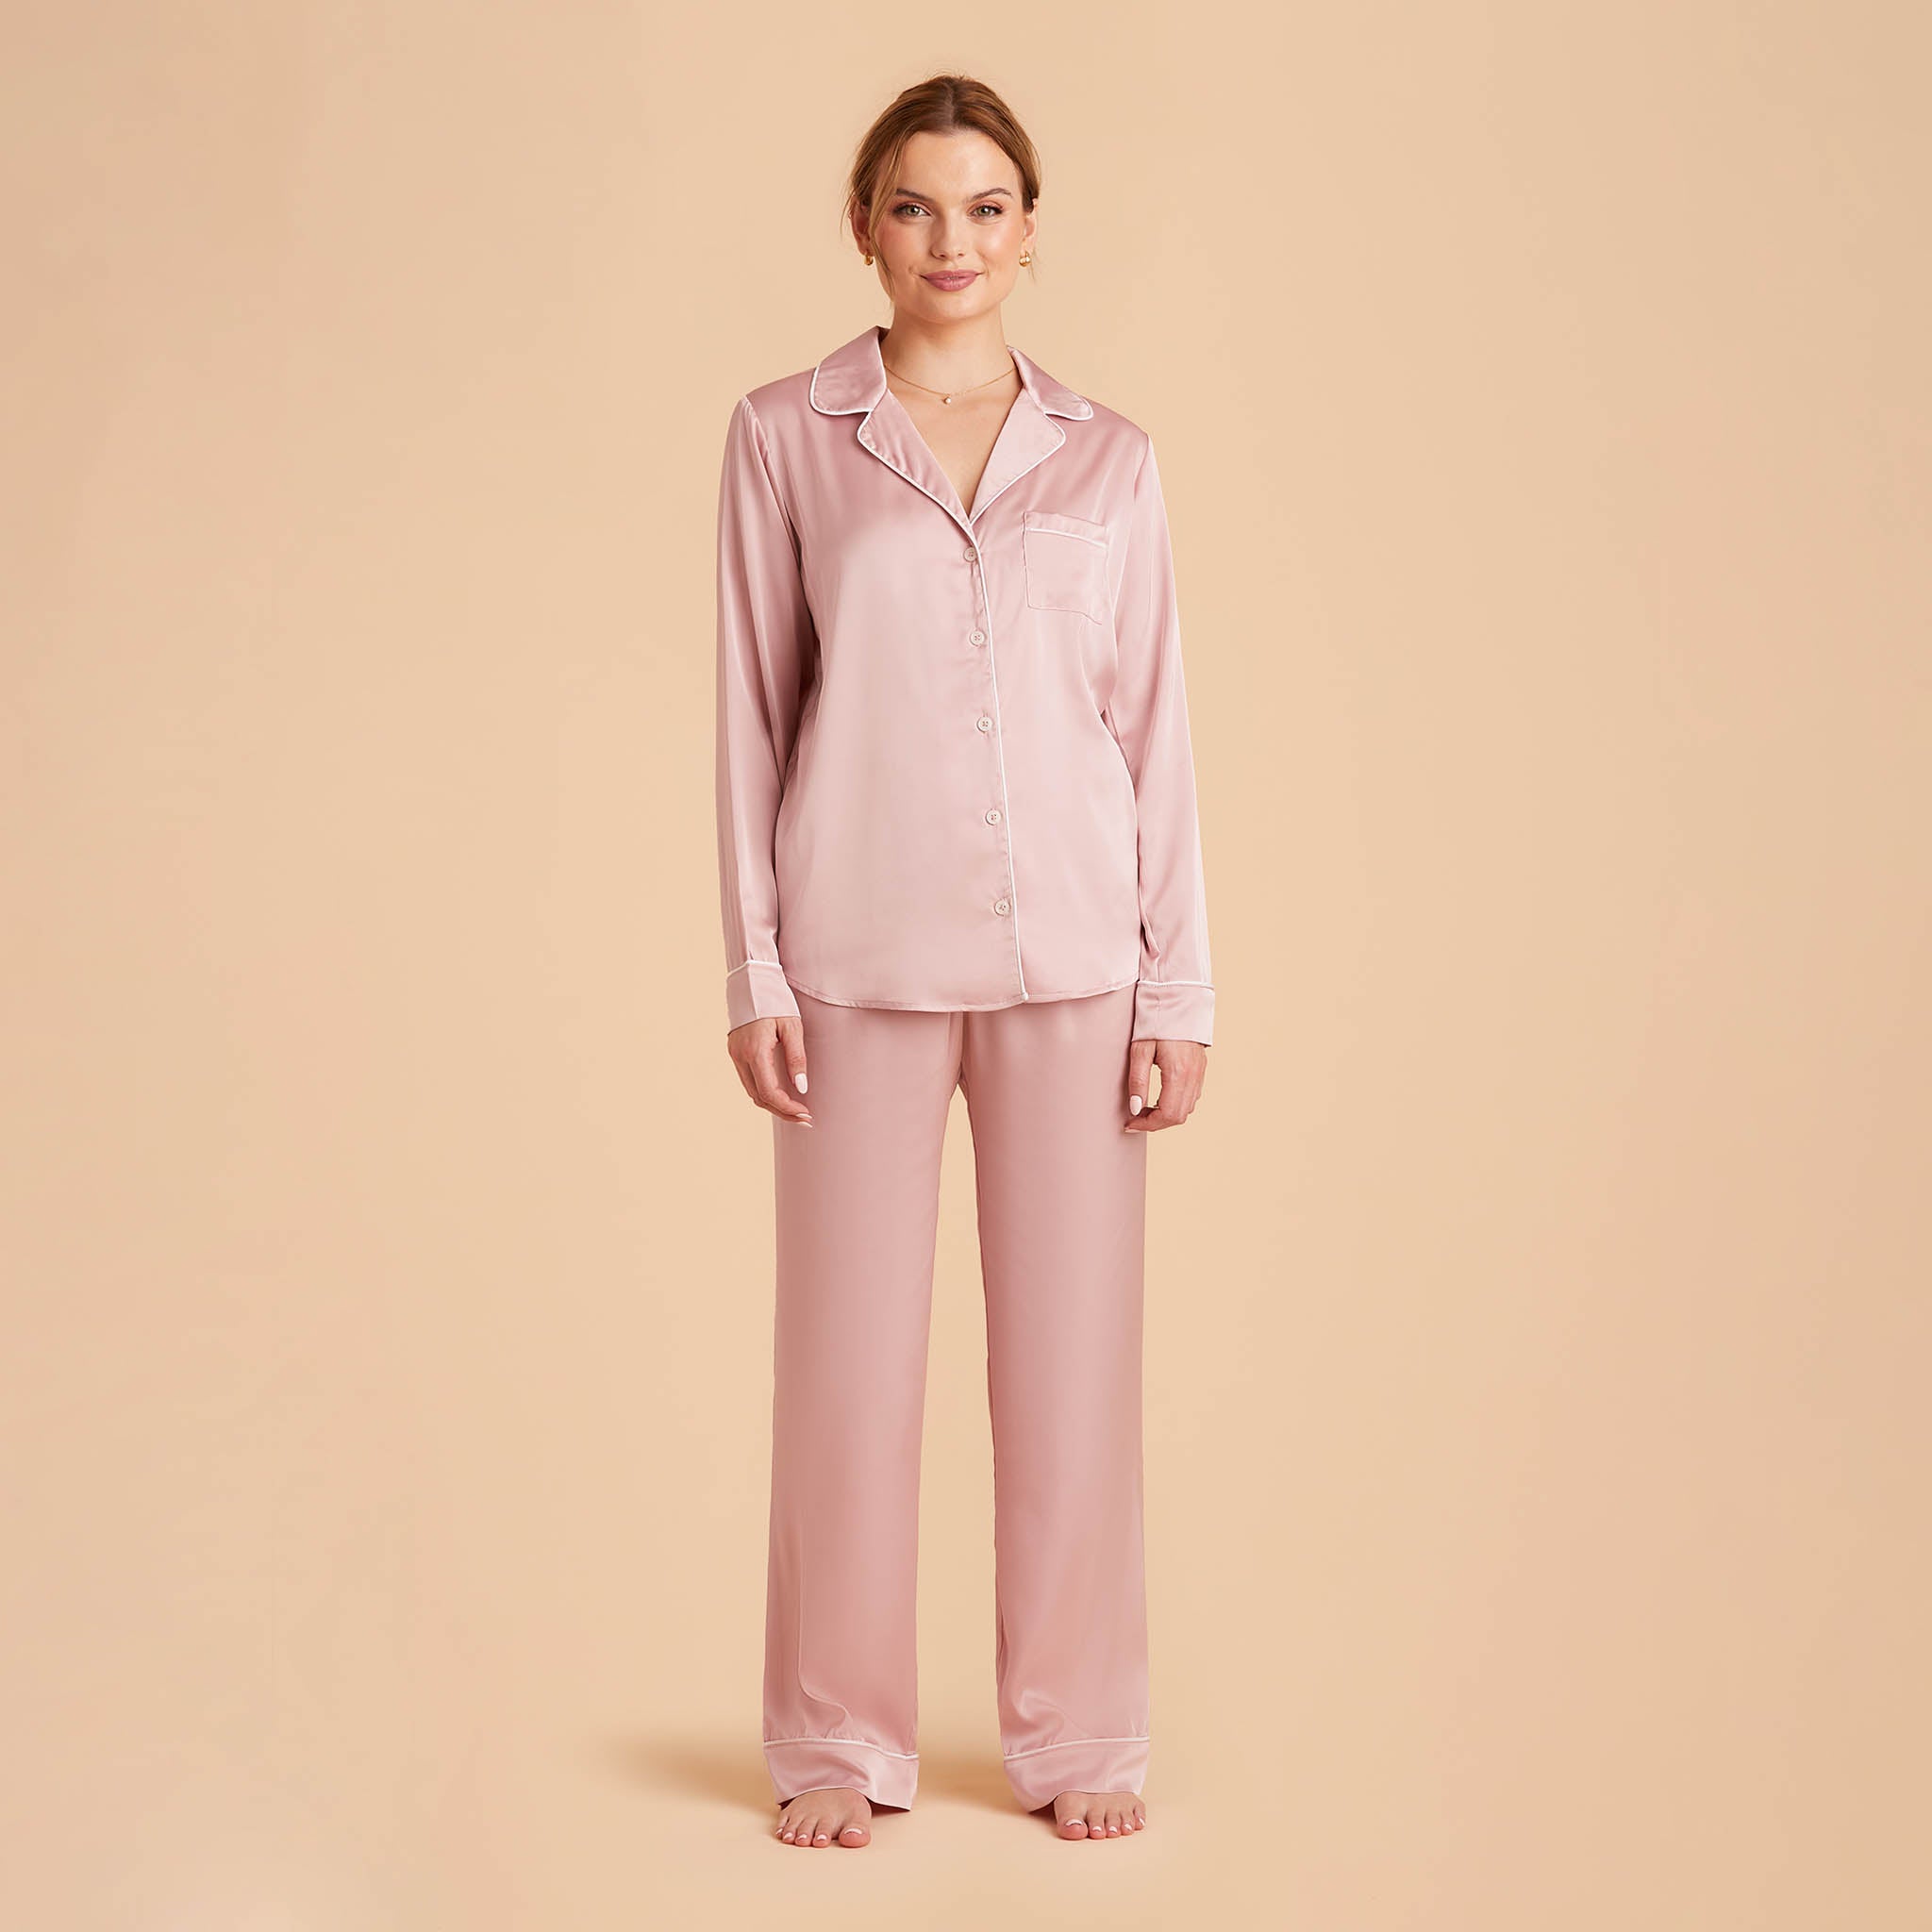 Jonny Satin Pants Bridesmaid Pajamas With White Piping in dusty pink, front view